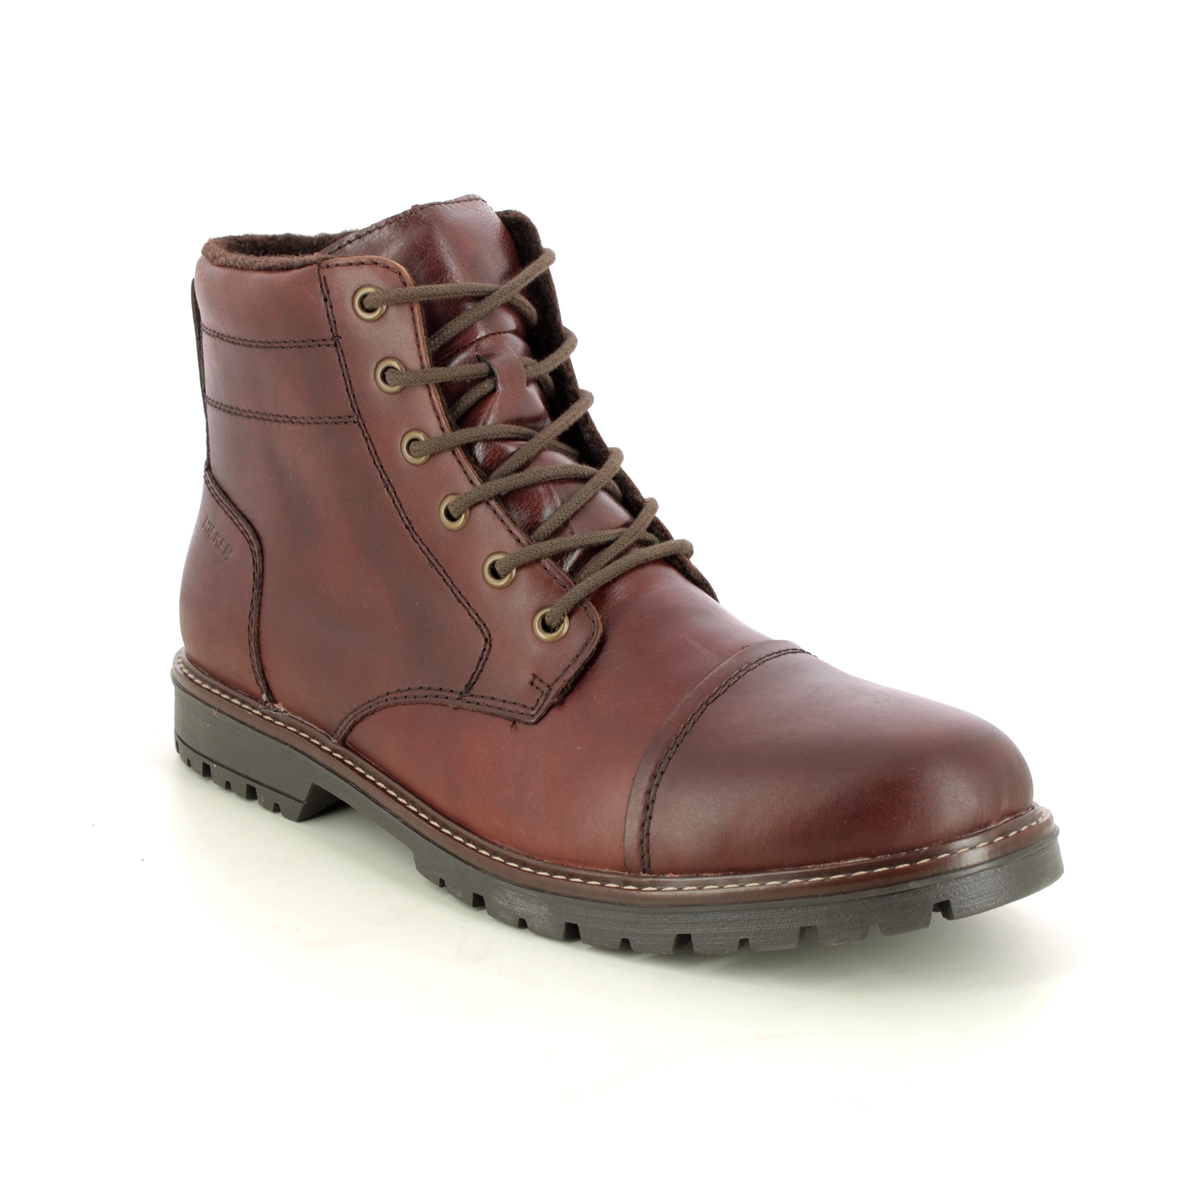 Rieker Vittore Cap Brown Leather Mens Winter Boots F3604-25 In Size 48 In Plain Brown Leather